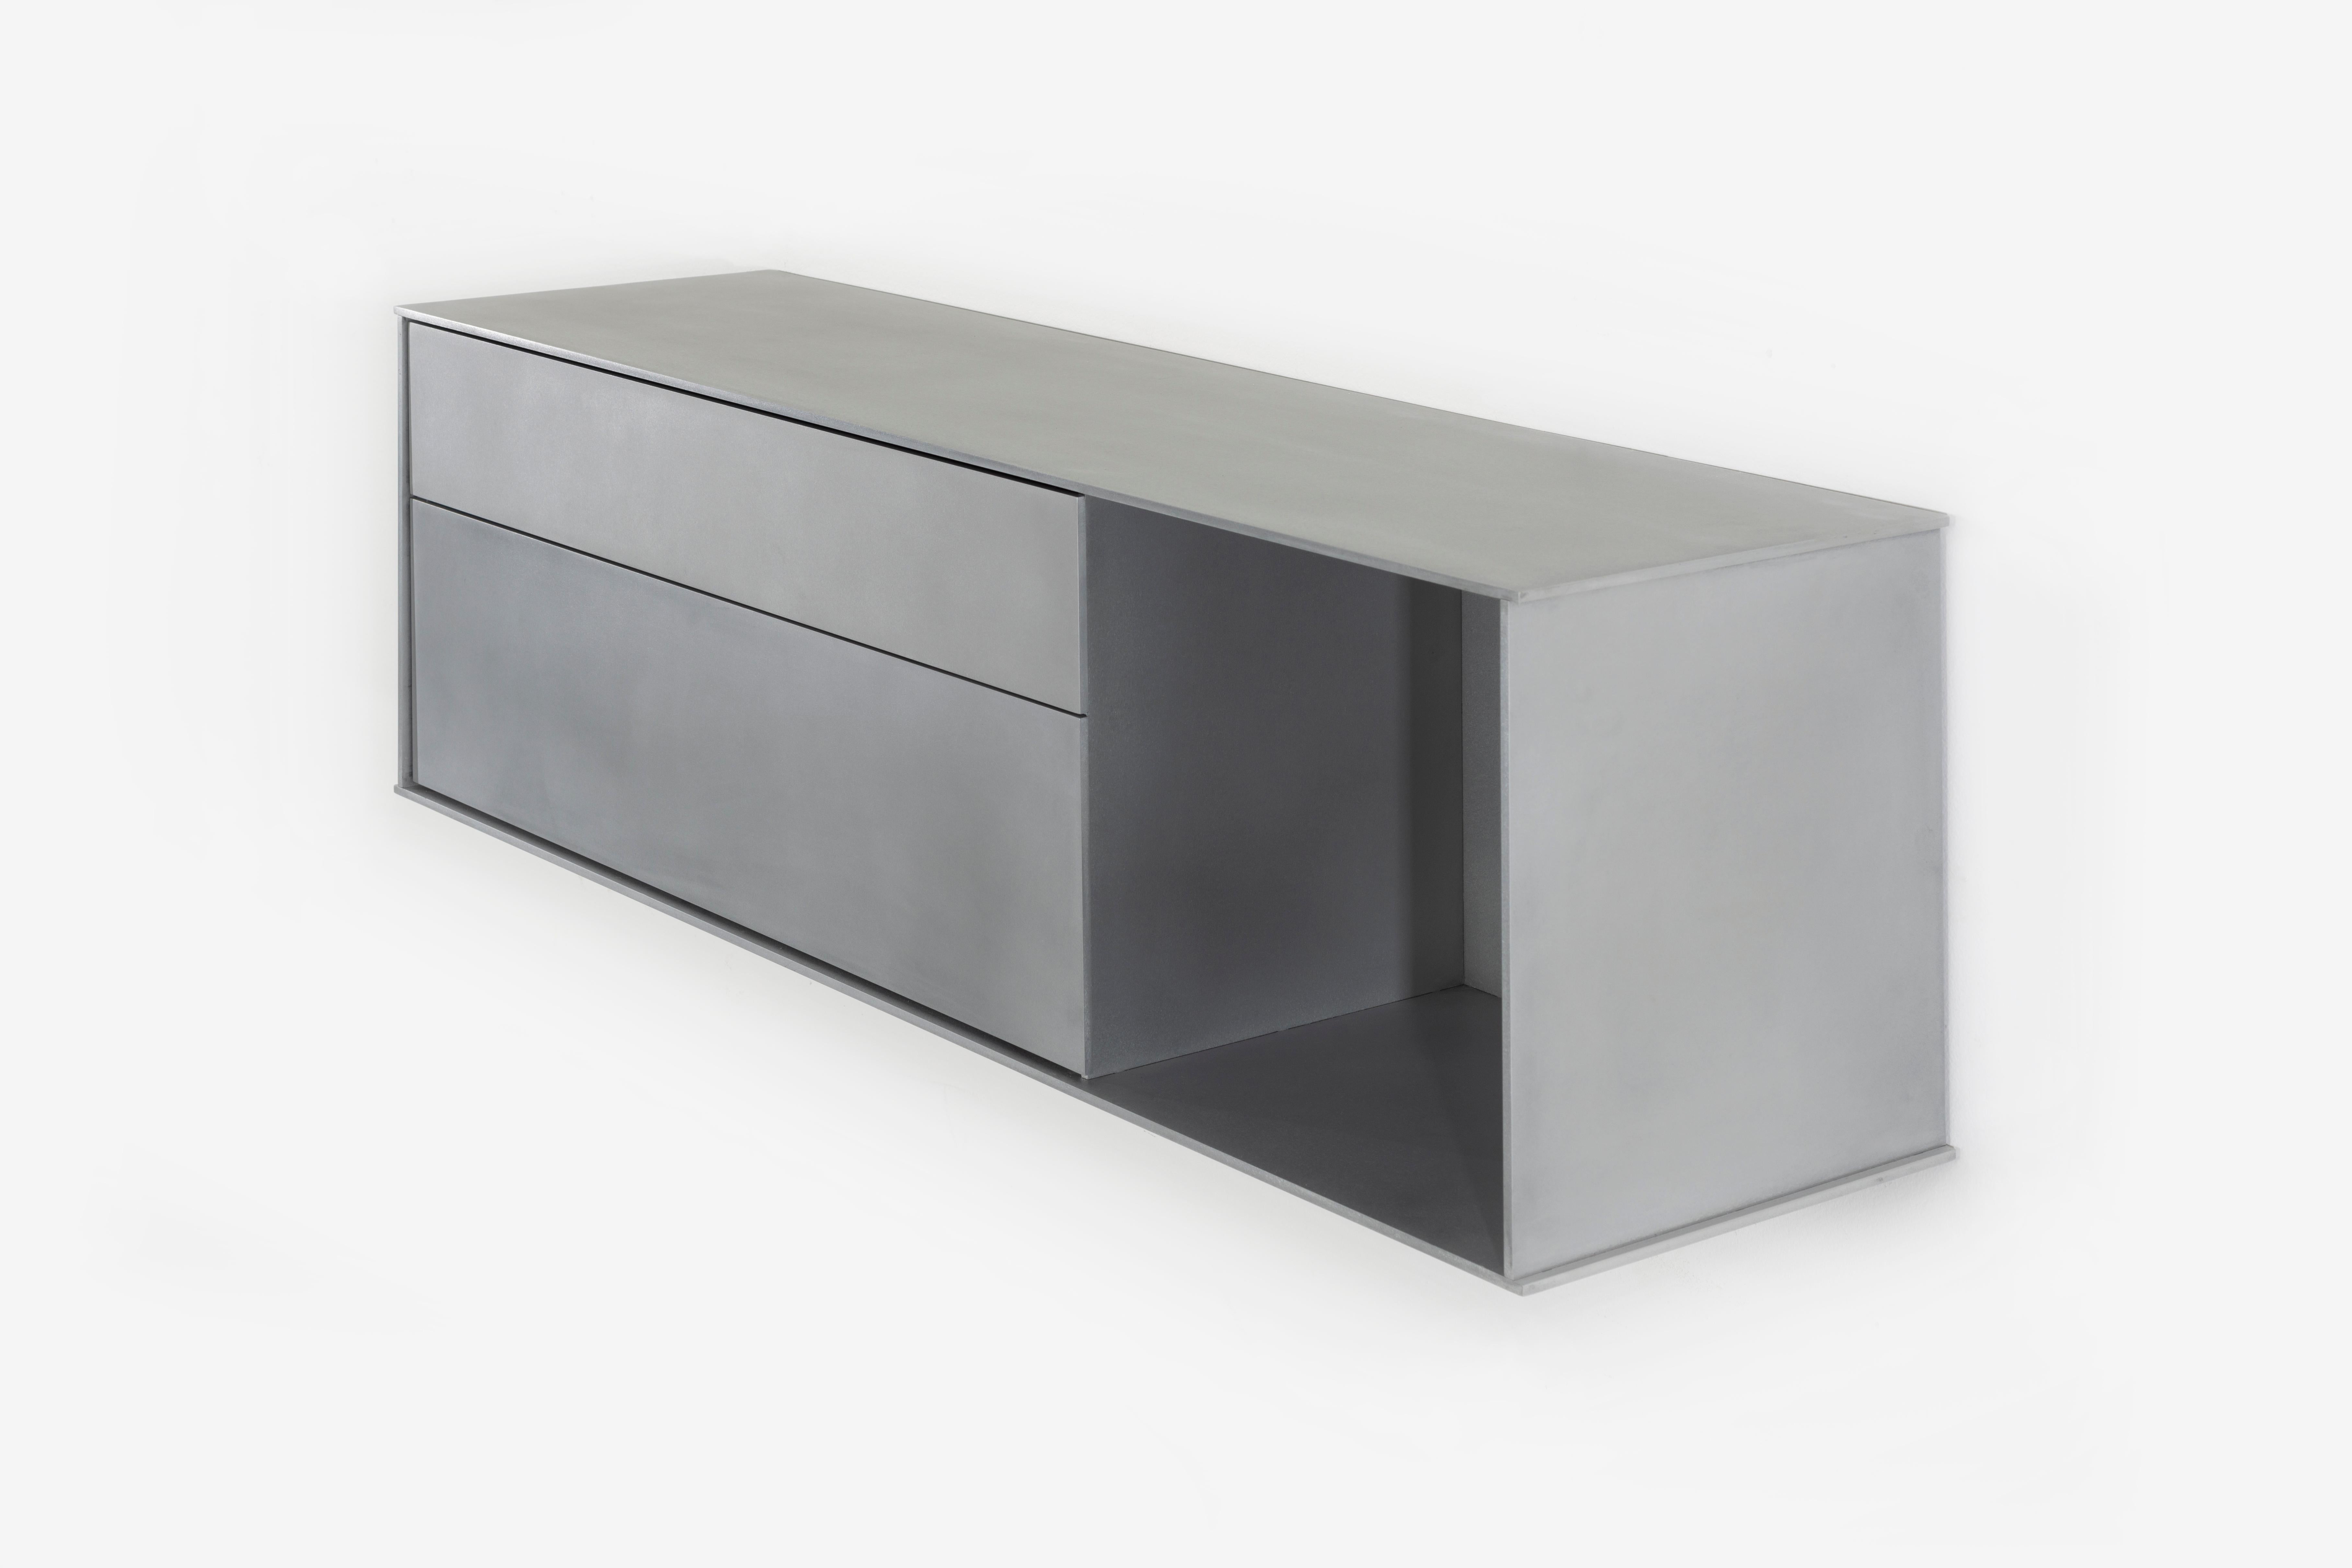 American OG Wall-Mounted Shelf with Drawers in Waxed Aluminum Plate by Jonathan Nesci For Sale